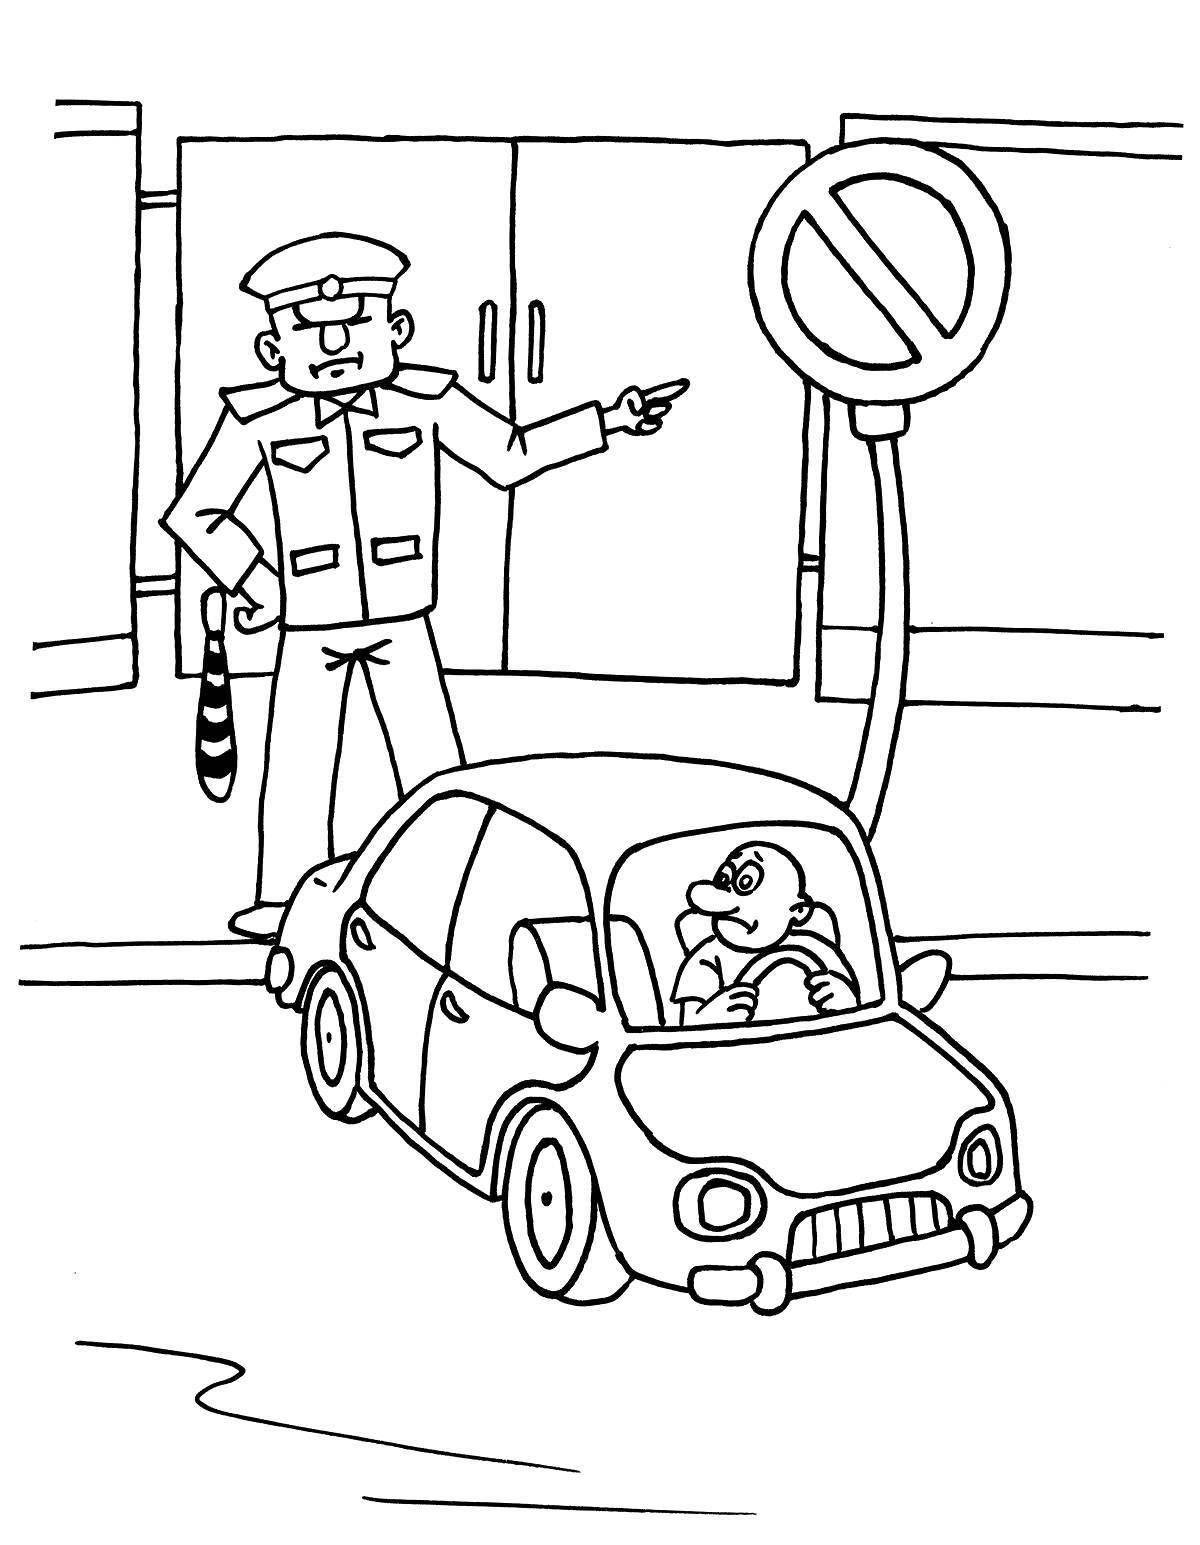 Exciting traffic rules coloring pages for kids